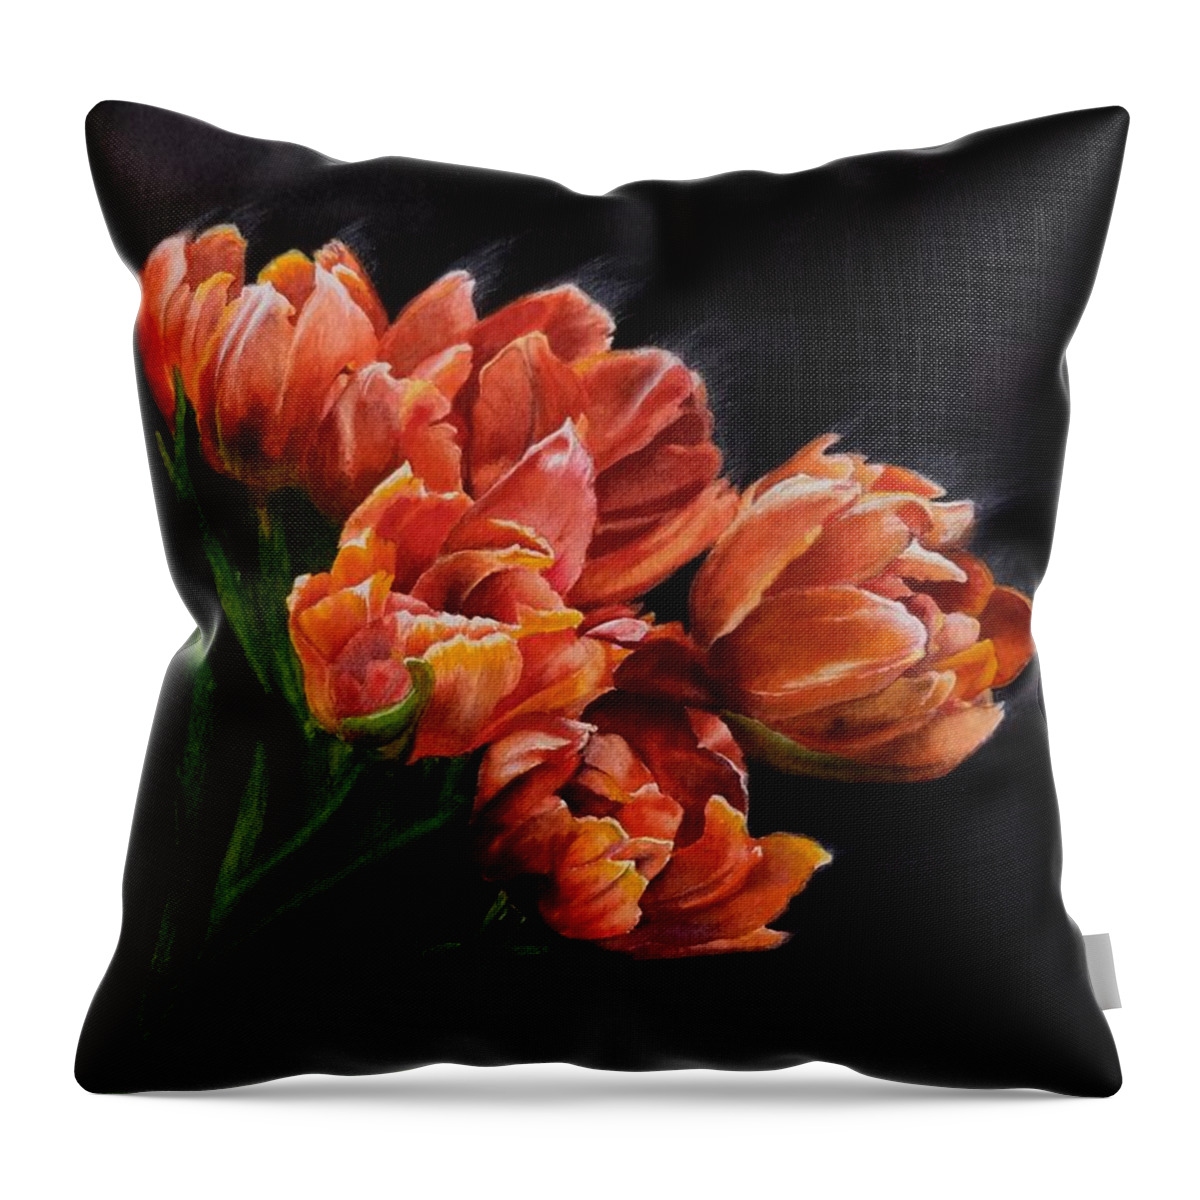 Still Life Throw Pillow featuring the painting Red Tulips by Jeanette Ferguson